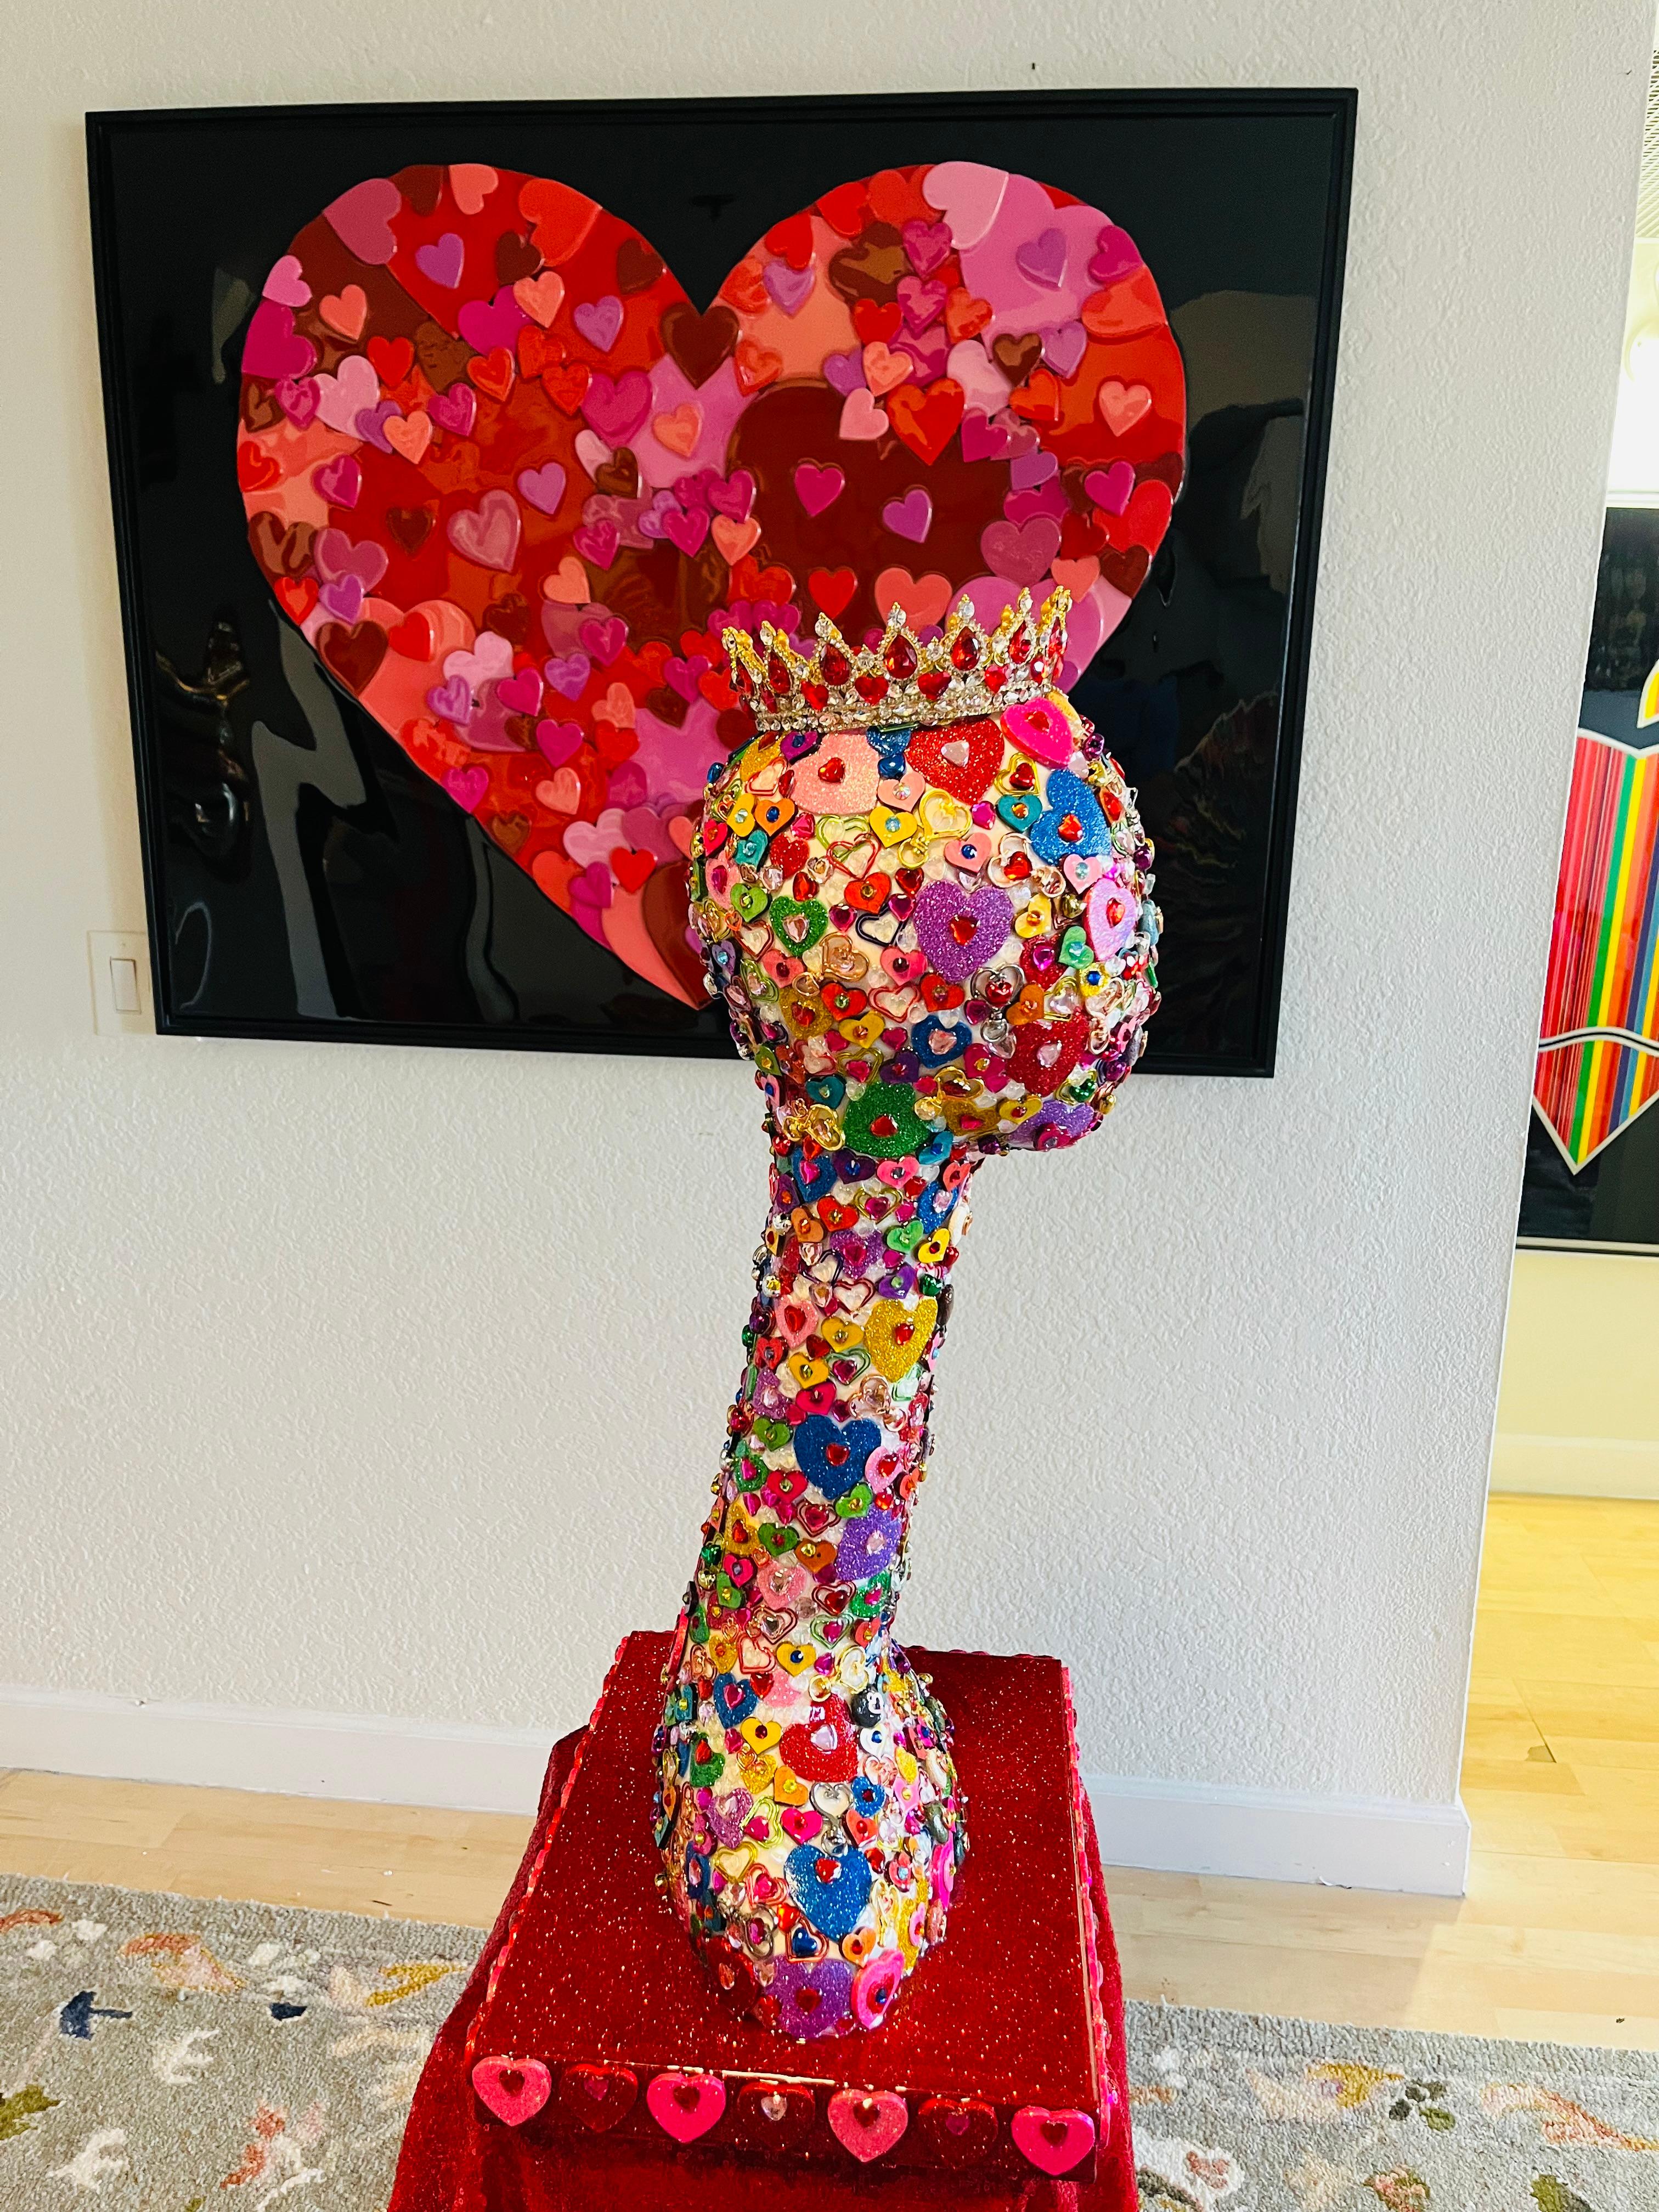 QUEEN OF HEARTS (Original and One of A Kind Mixed Media Sculpture) 1